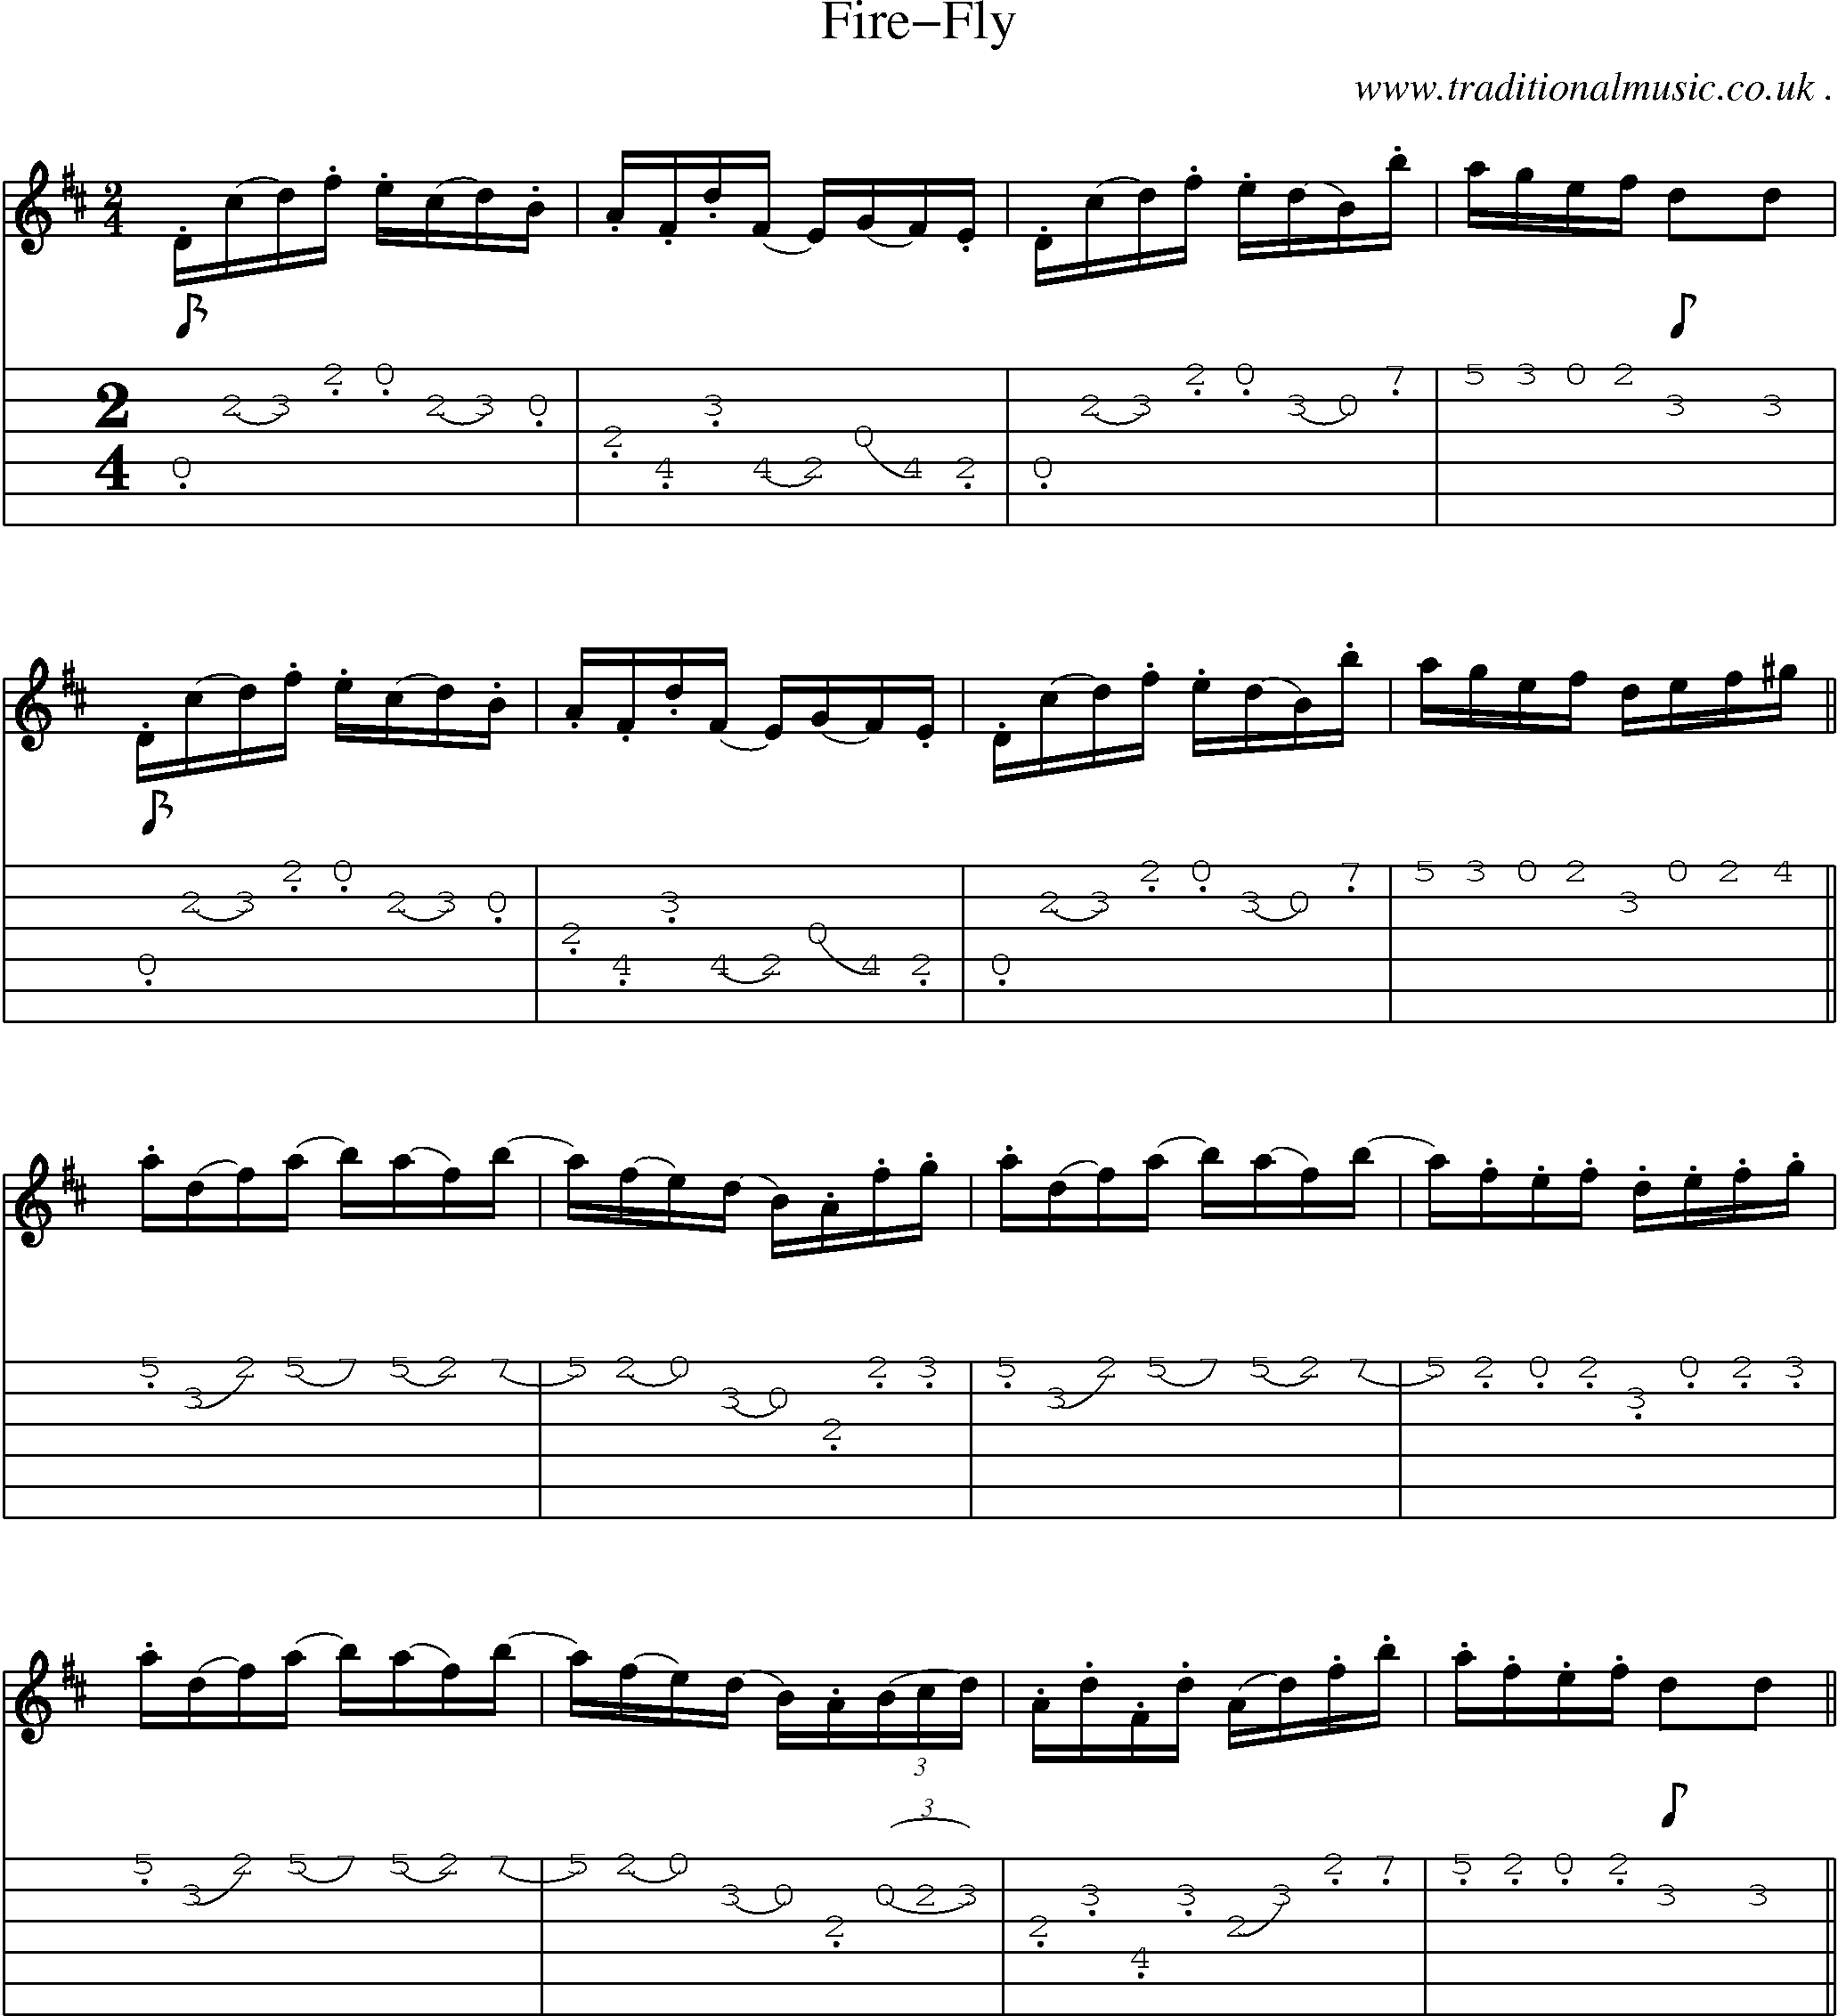 Sheet-Music and Guitar Tabs for Fire-fly